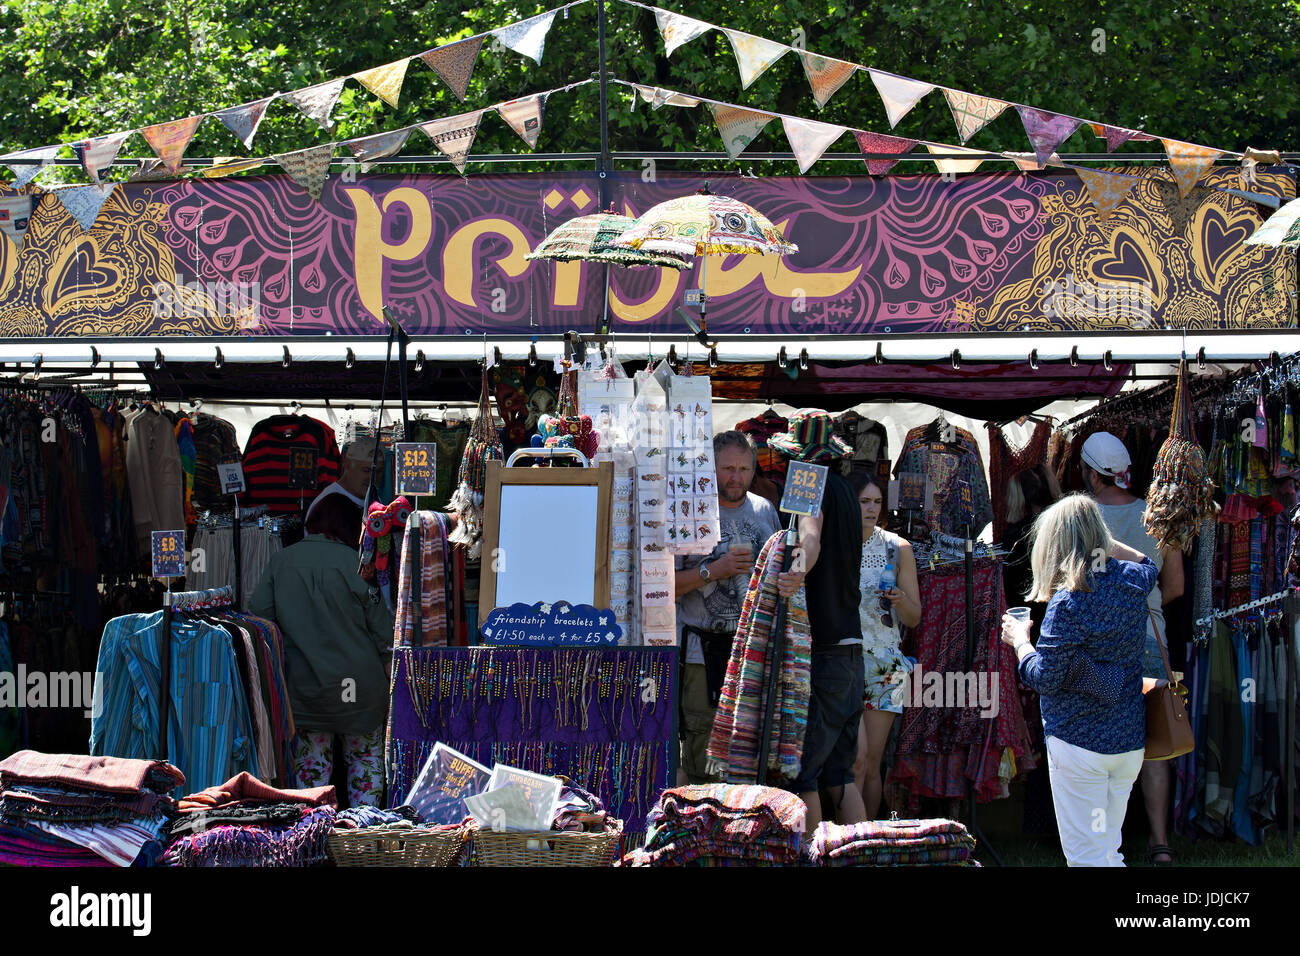 A stall selling African clothing at the Africa Oye music festival in Sefton Park Liverpool UK Stock Photo